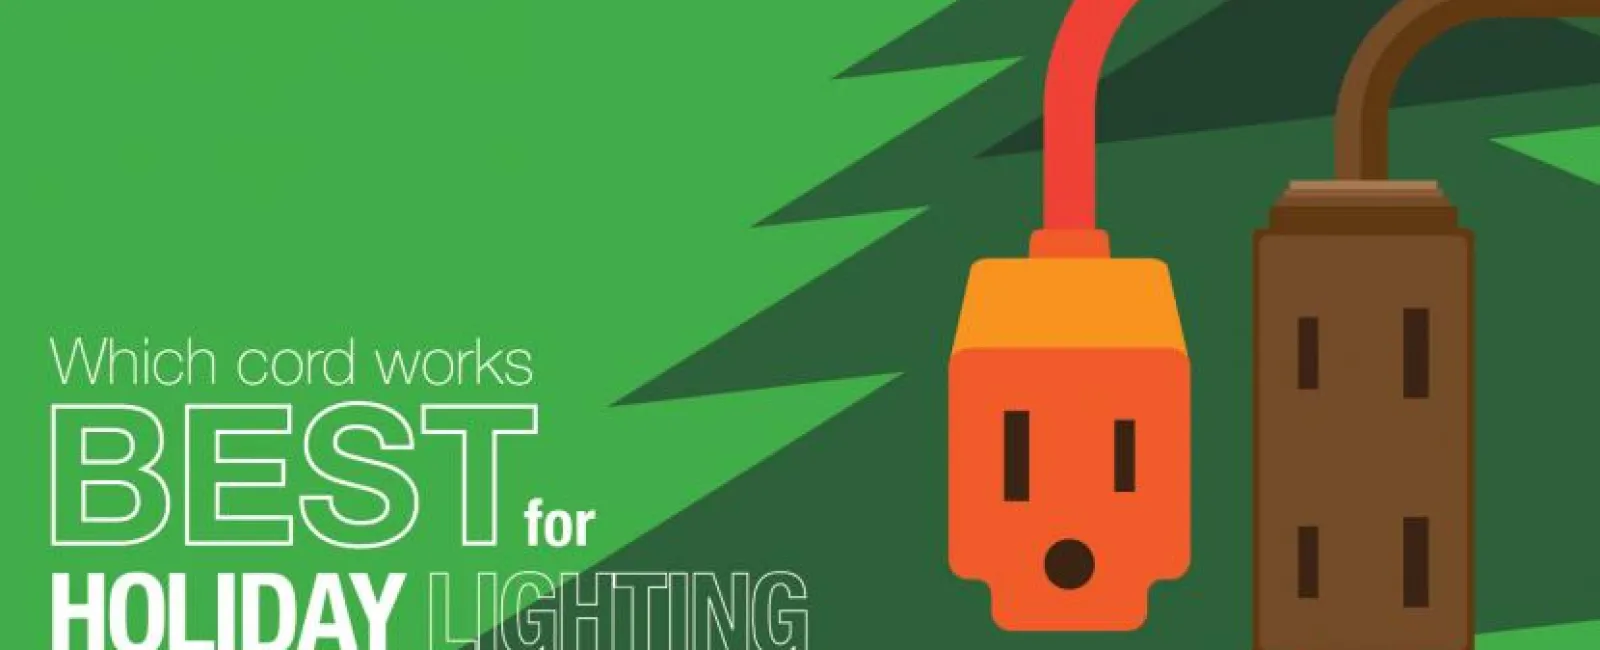 Which Cord Works Best for Holiday Lighting?